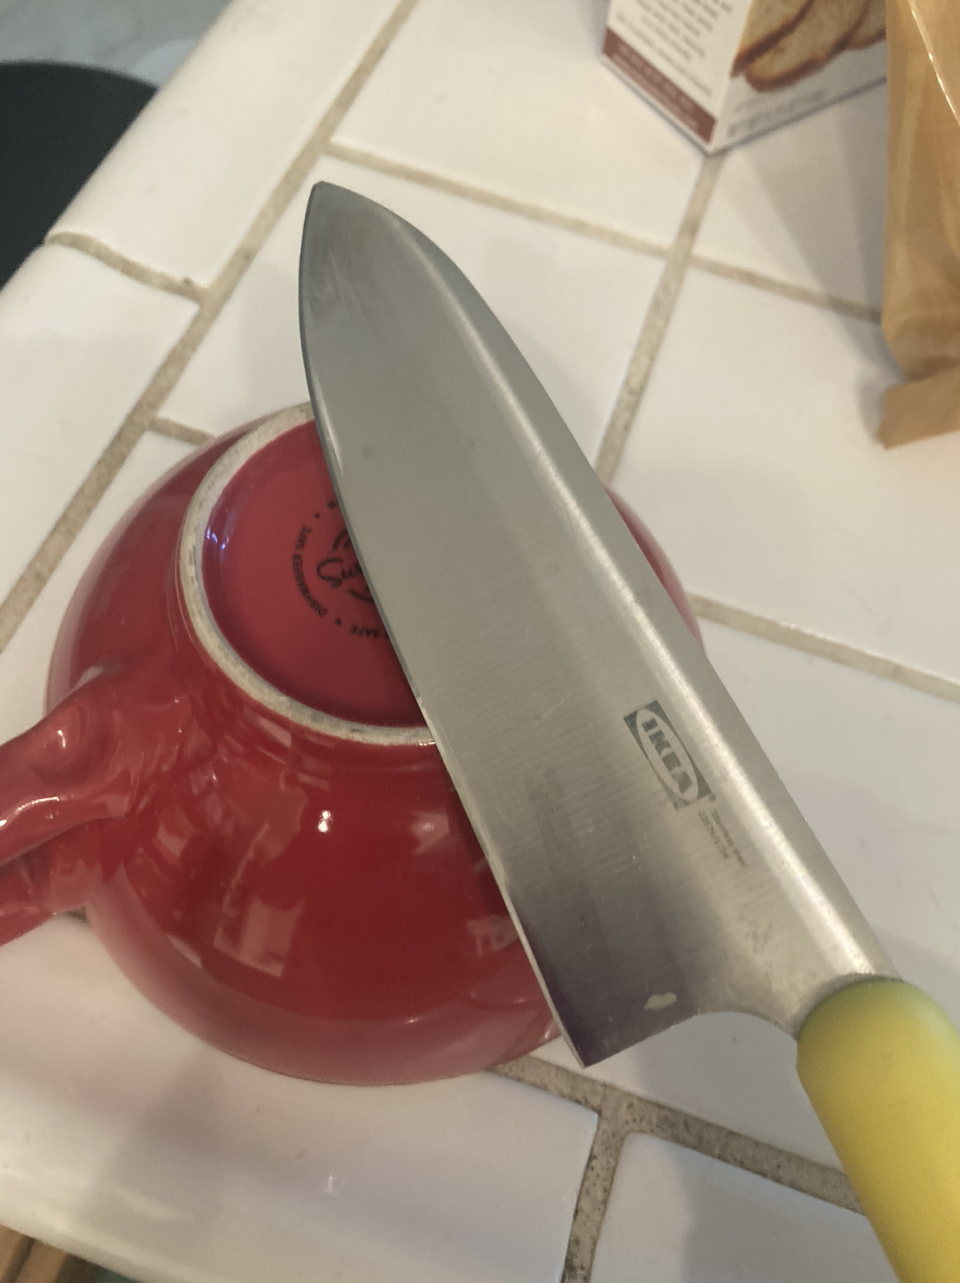 Knife resting on red teapot on a tiled counter